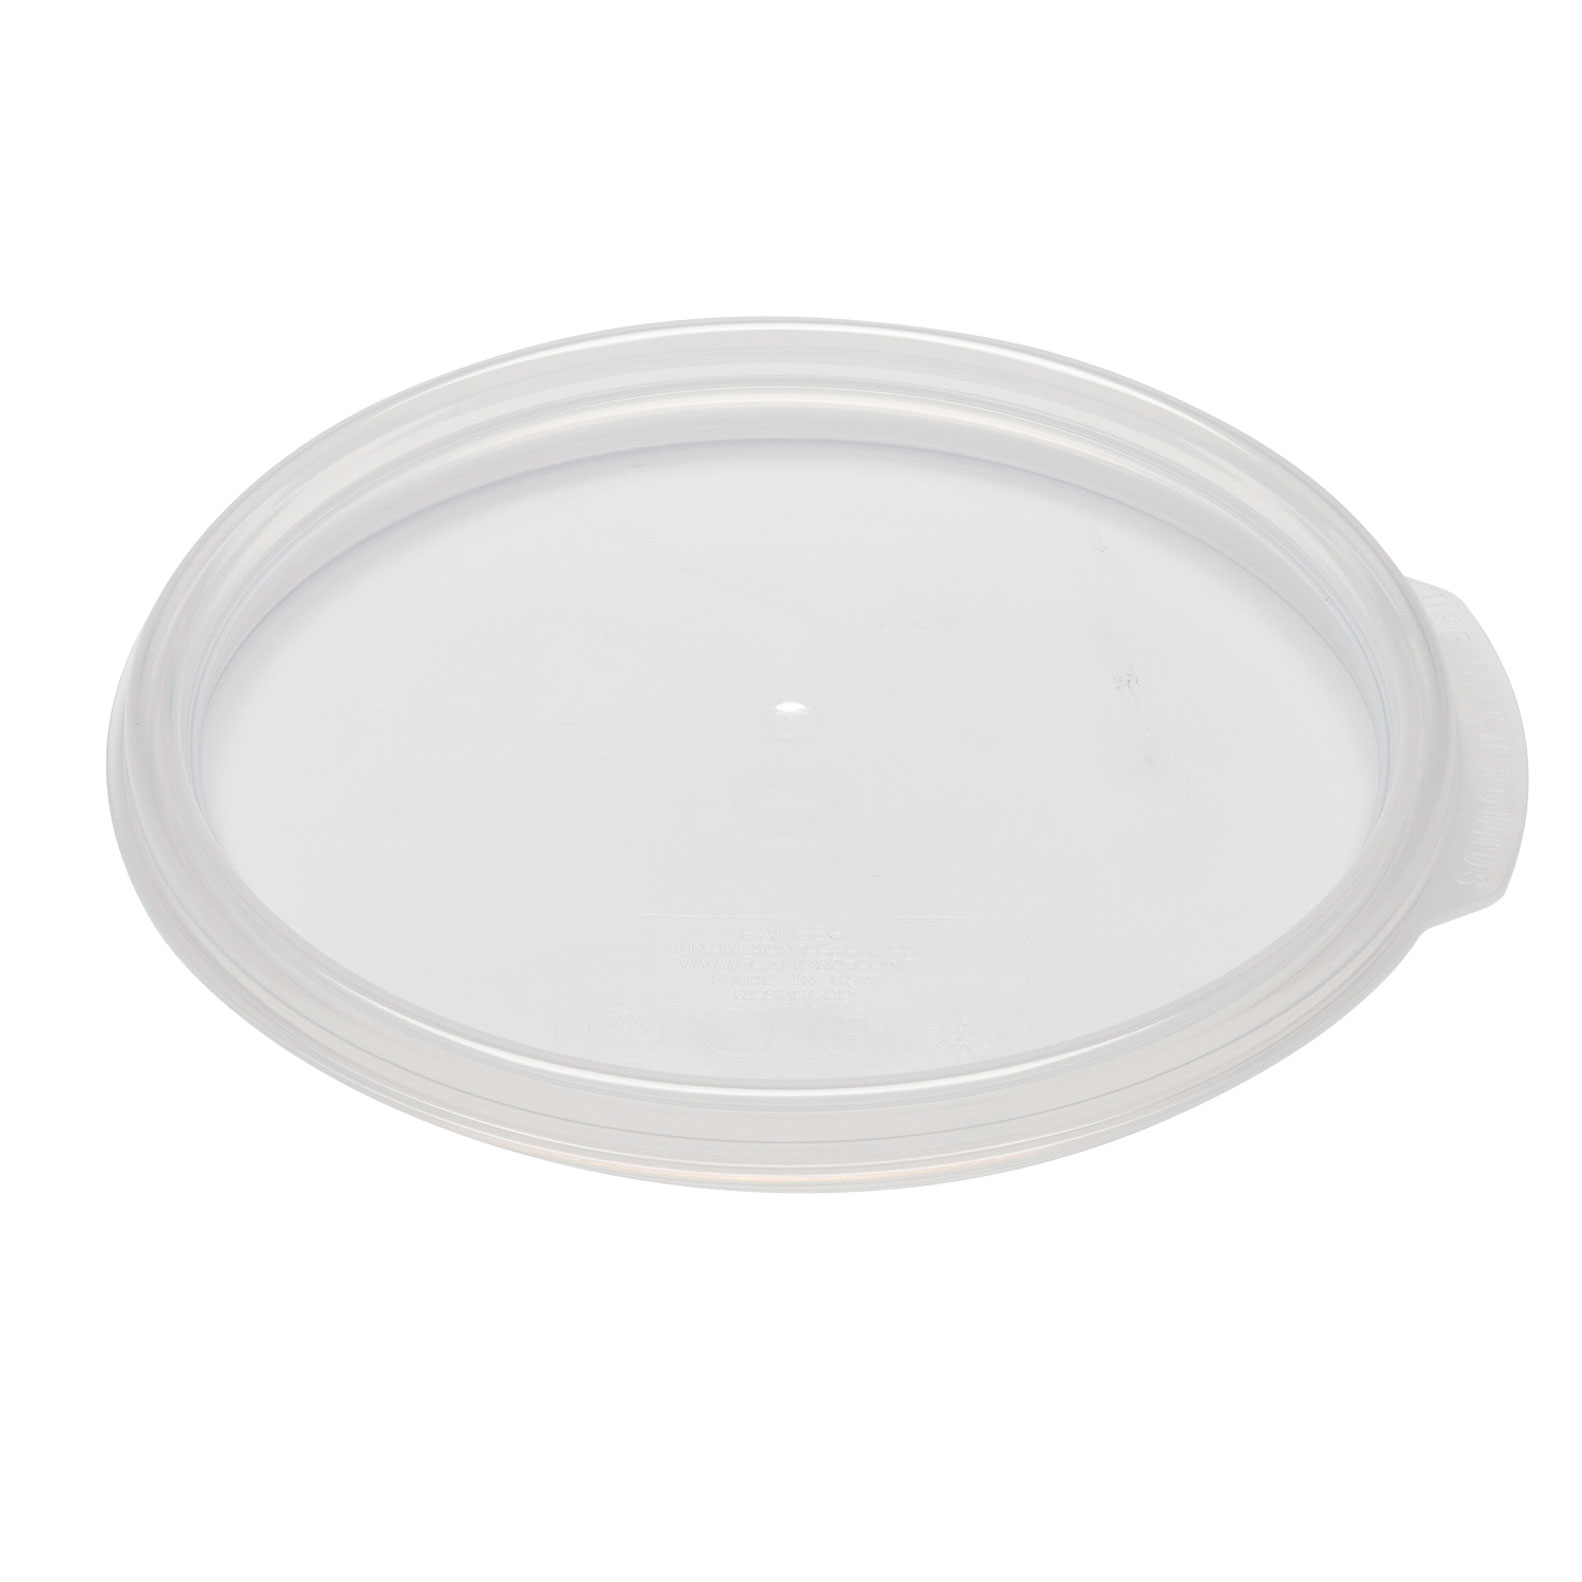 SEAL COVER FOR CW CLEAR 1qt. ROUND FOOD CONTAINERS, 